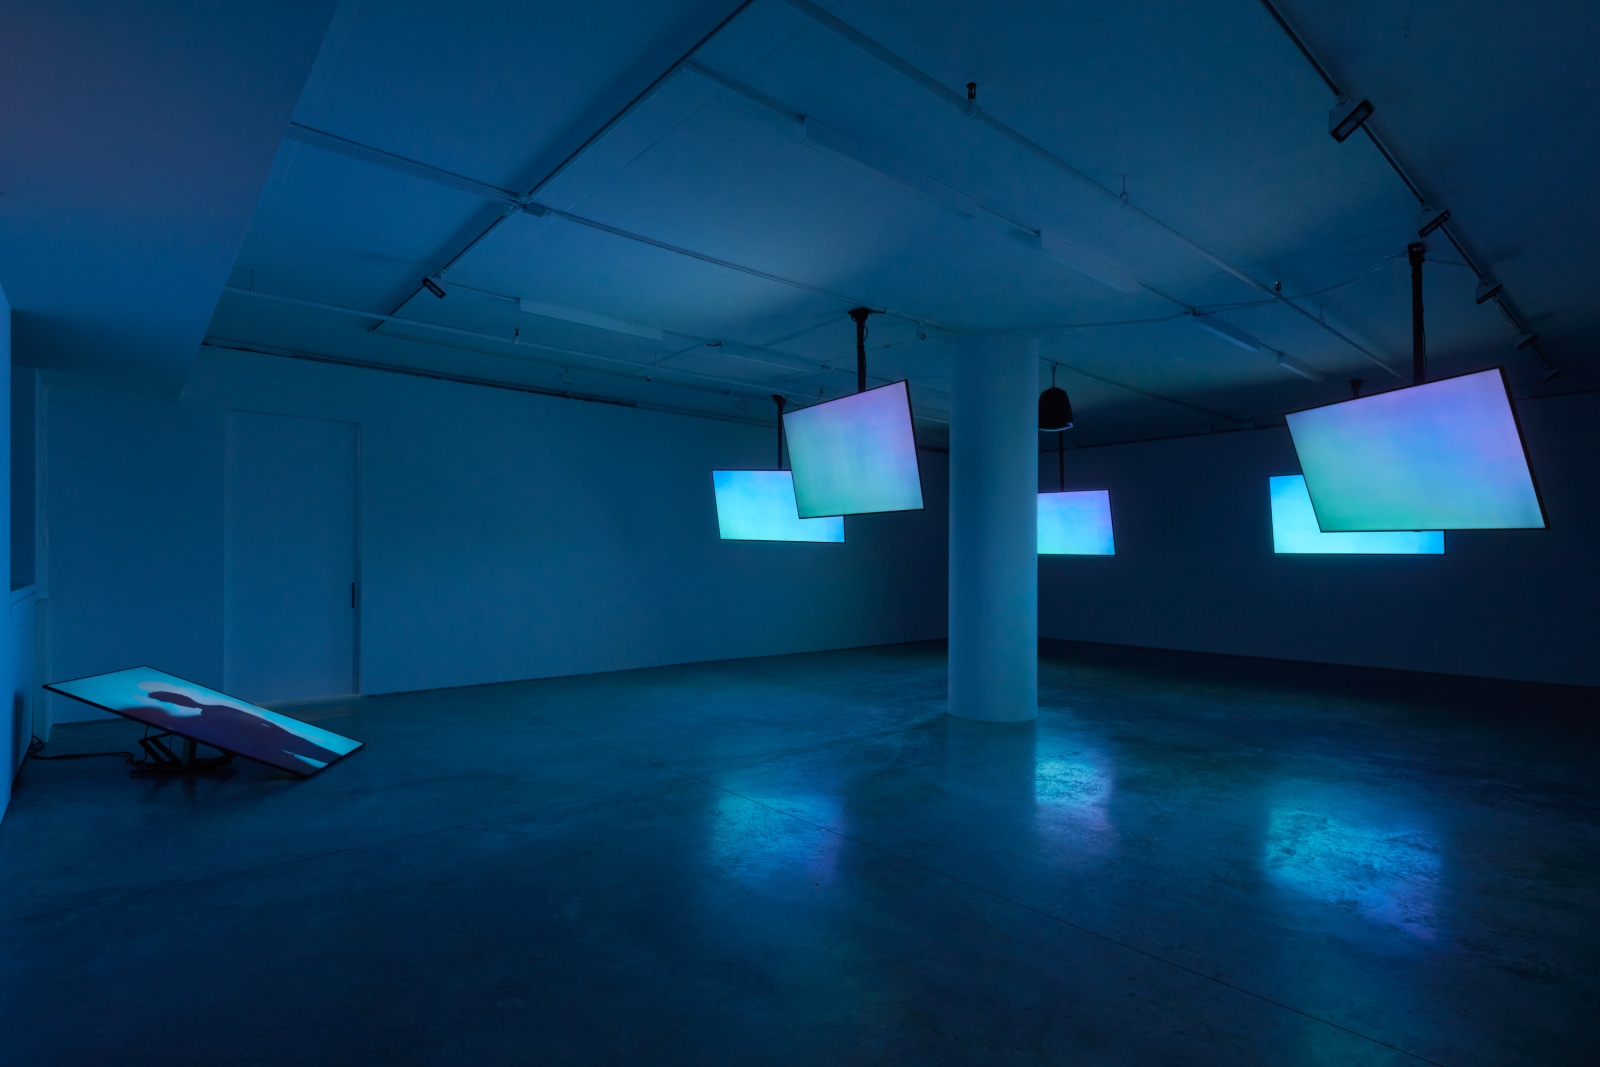 Photo of the installation by Le'Andra LeSeur containing five ceiling monitors and one floor monitor displaying shades of blue